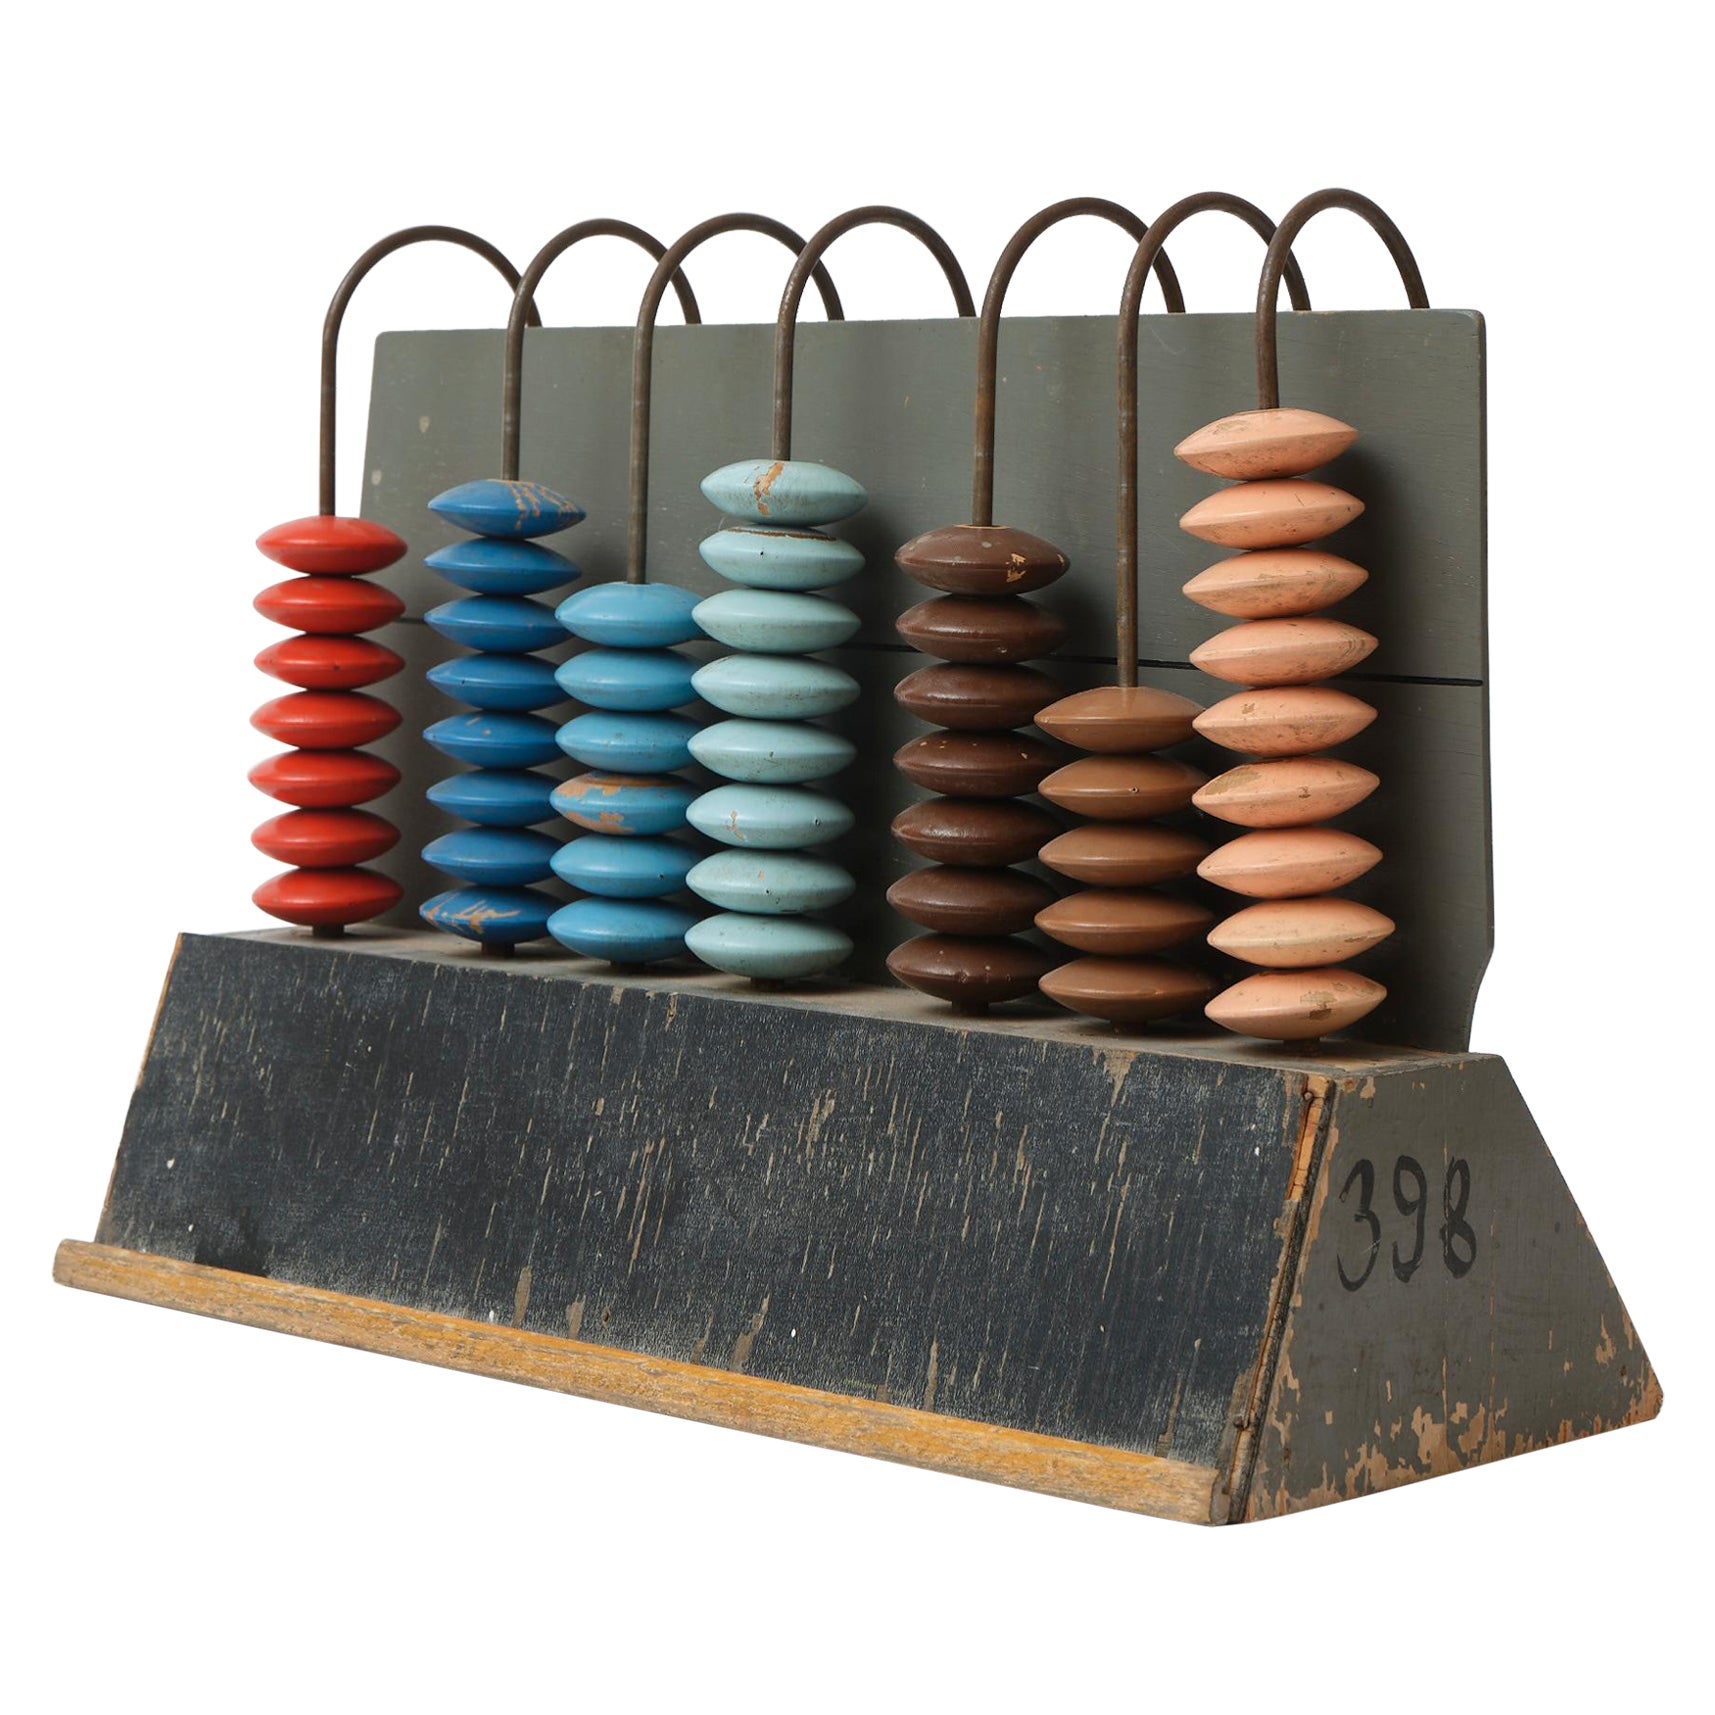 Big vintage handmade Czech abacus in amazing colors and great patina